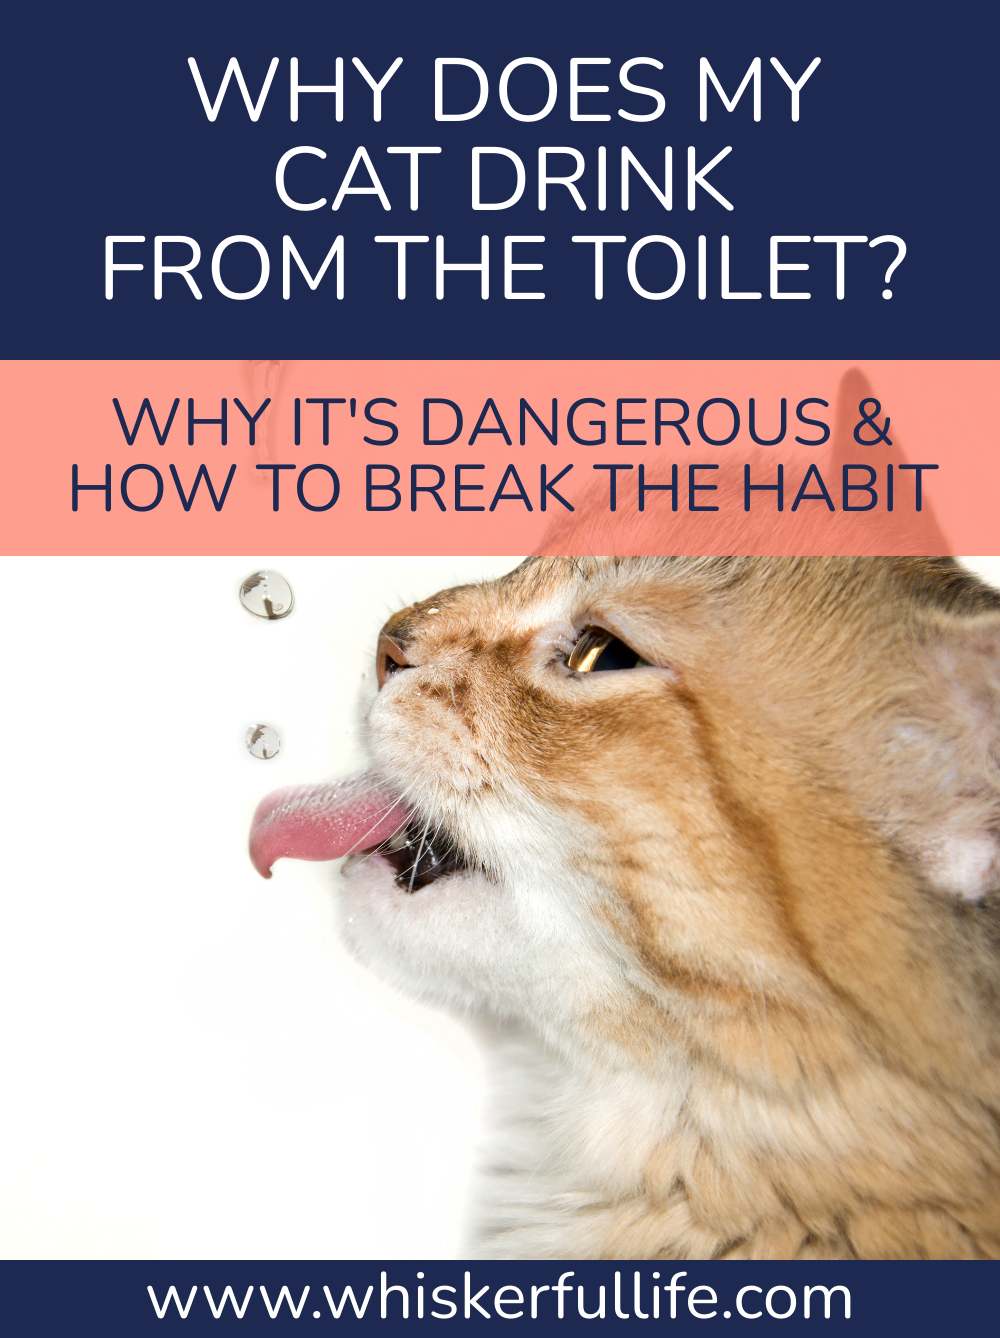 Why Cats Drink from the Toilet